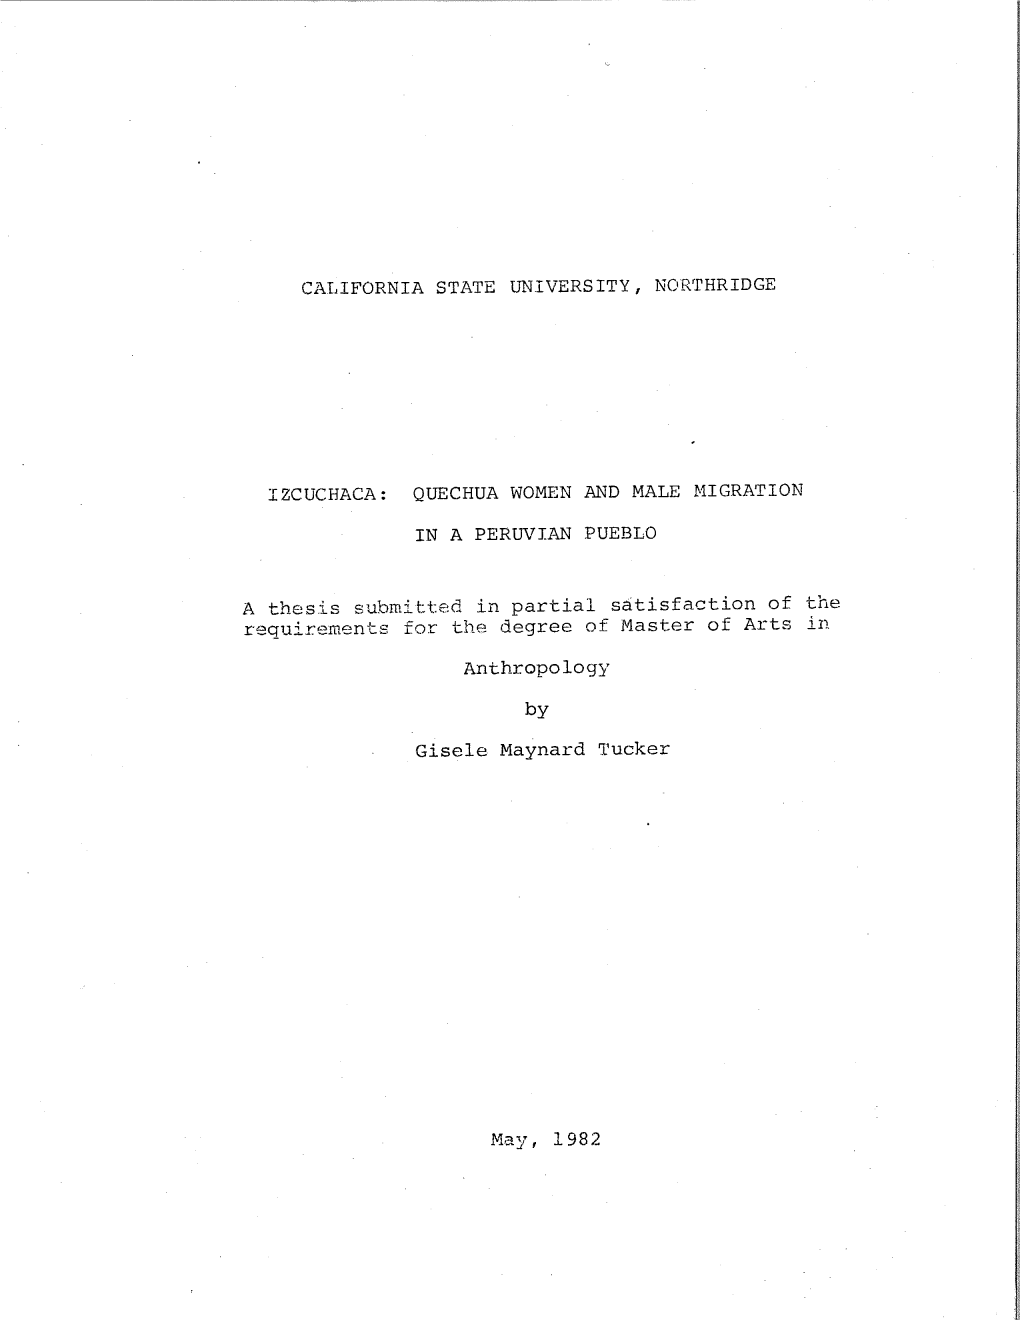 IN a PERUVIAN PUEBLO a Thesis Submitted in Partial S~Tisfaction Of